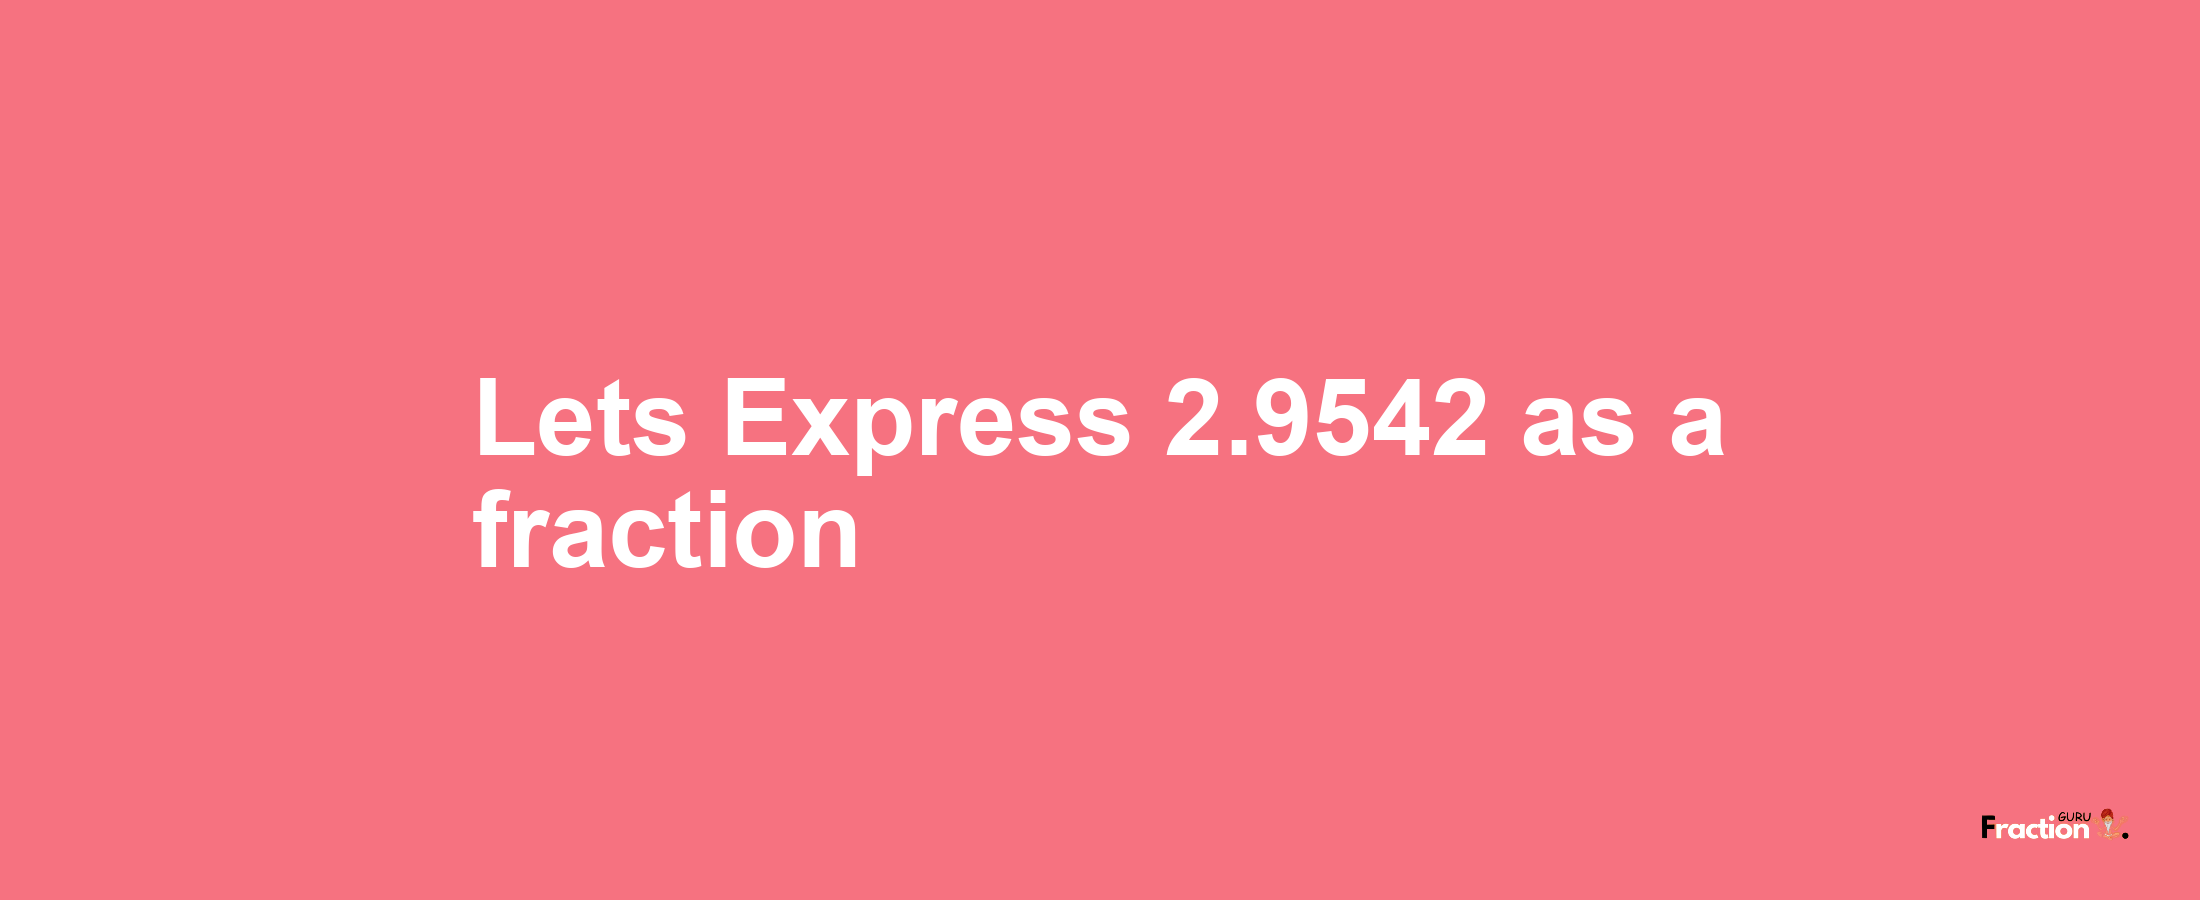 Lets Express 2.9542 as afraction